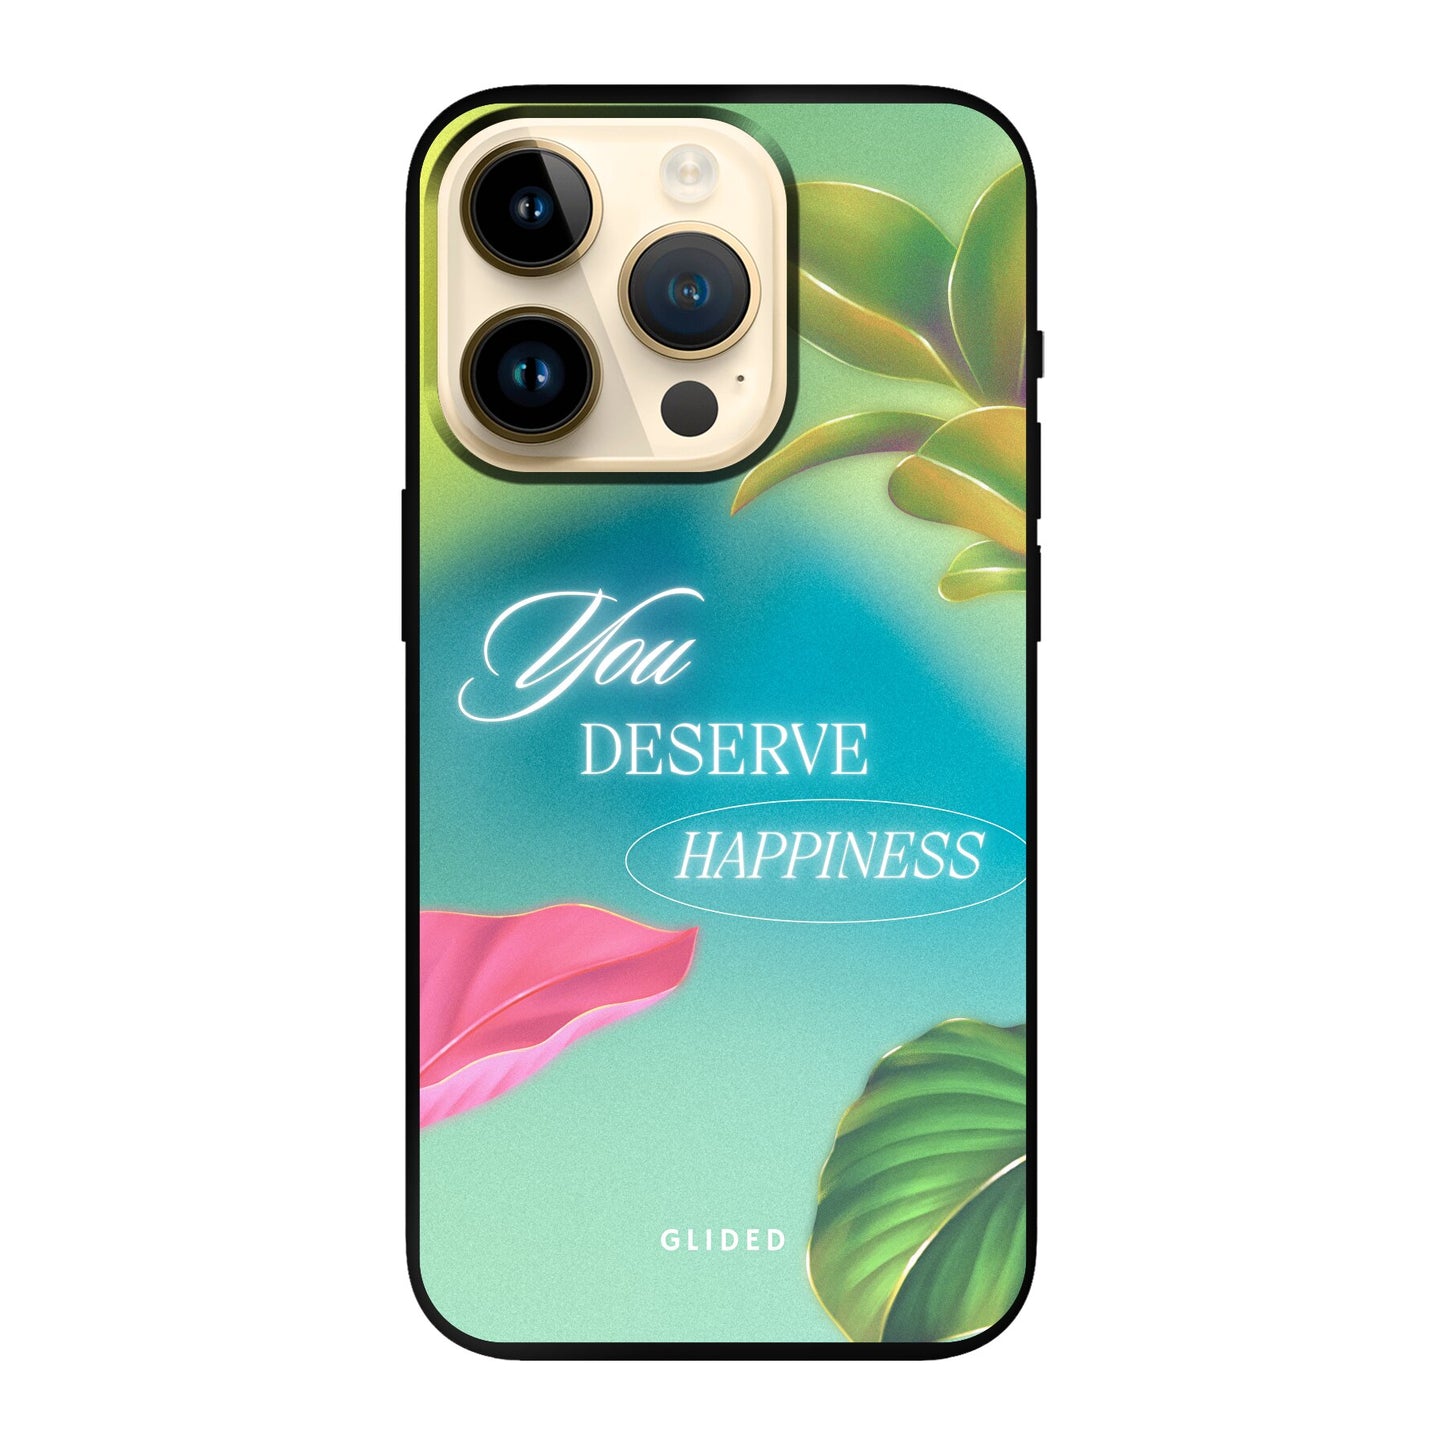 Happiness - iPhone 14 Pro - Soft case